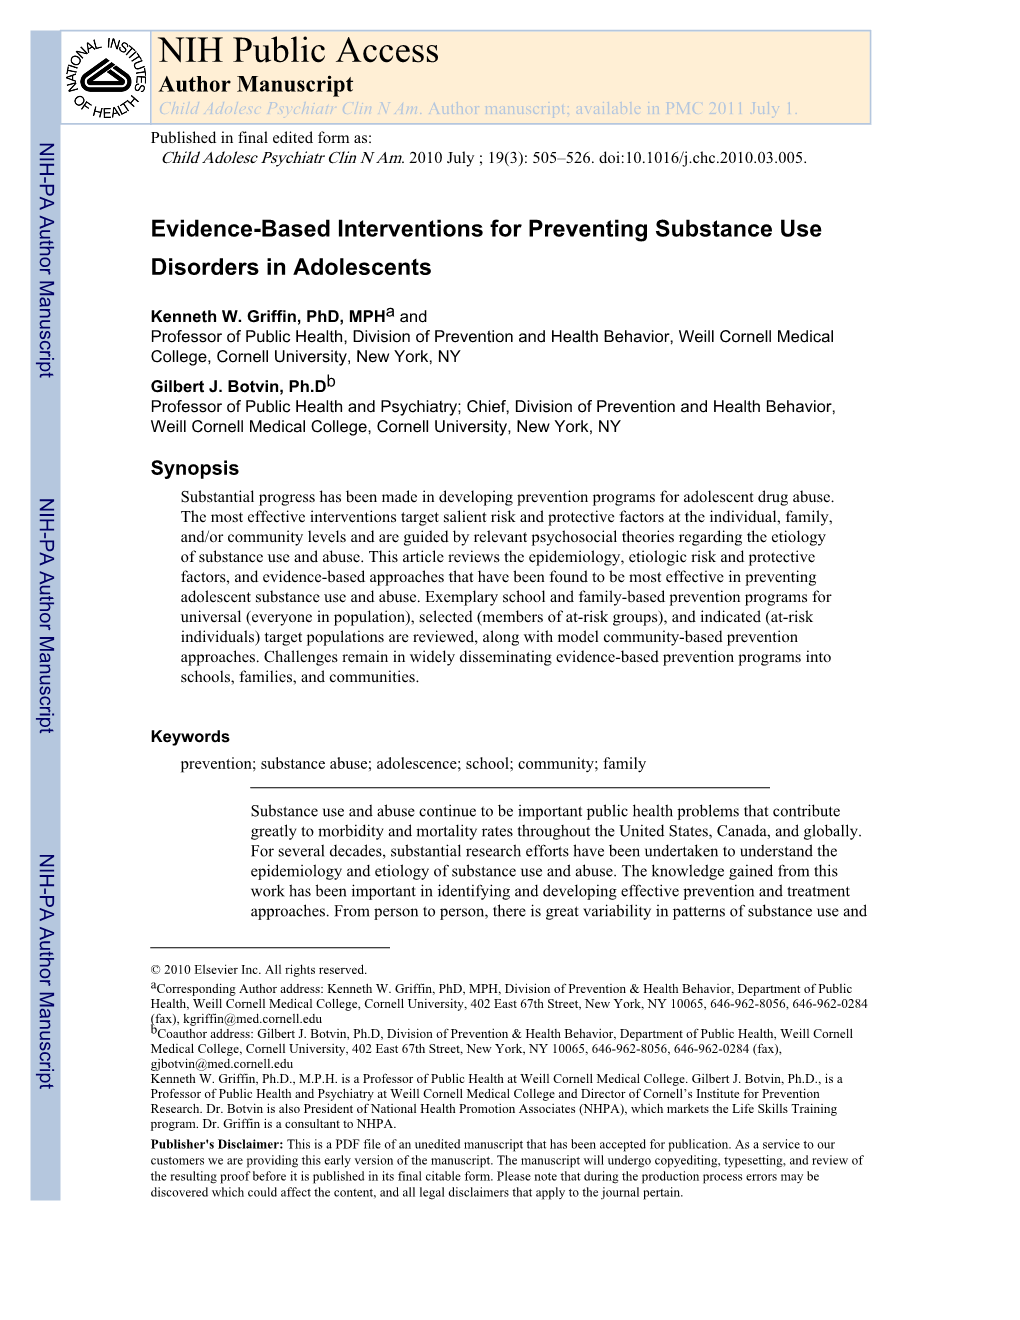 Evidence-Based Interventions for Preventing Substance Use Disorders in Adolescents